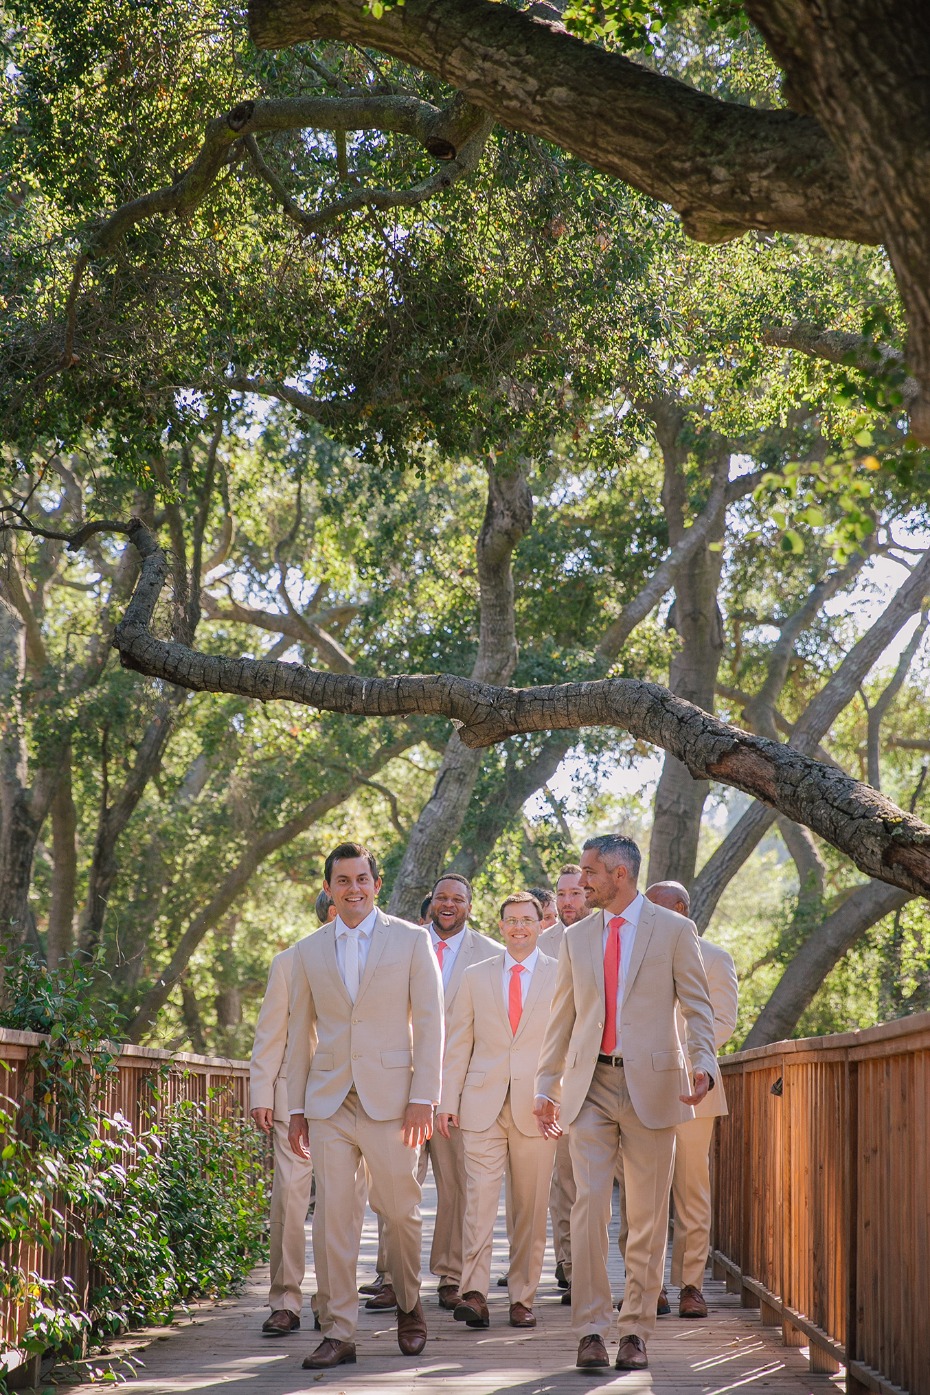 Tan suits with bright ties